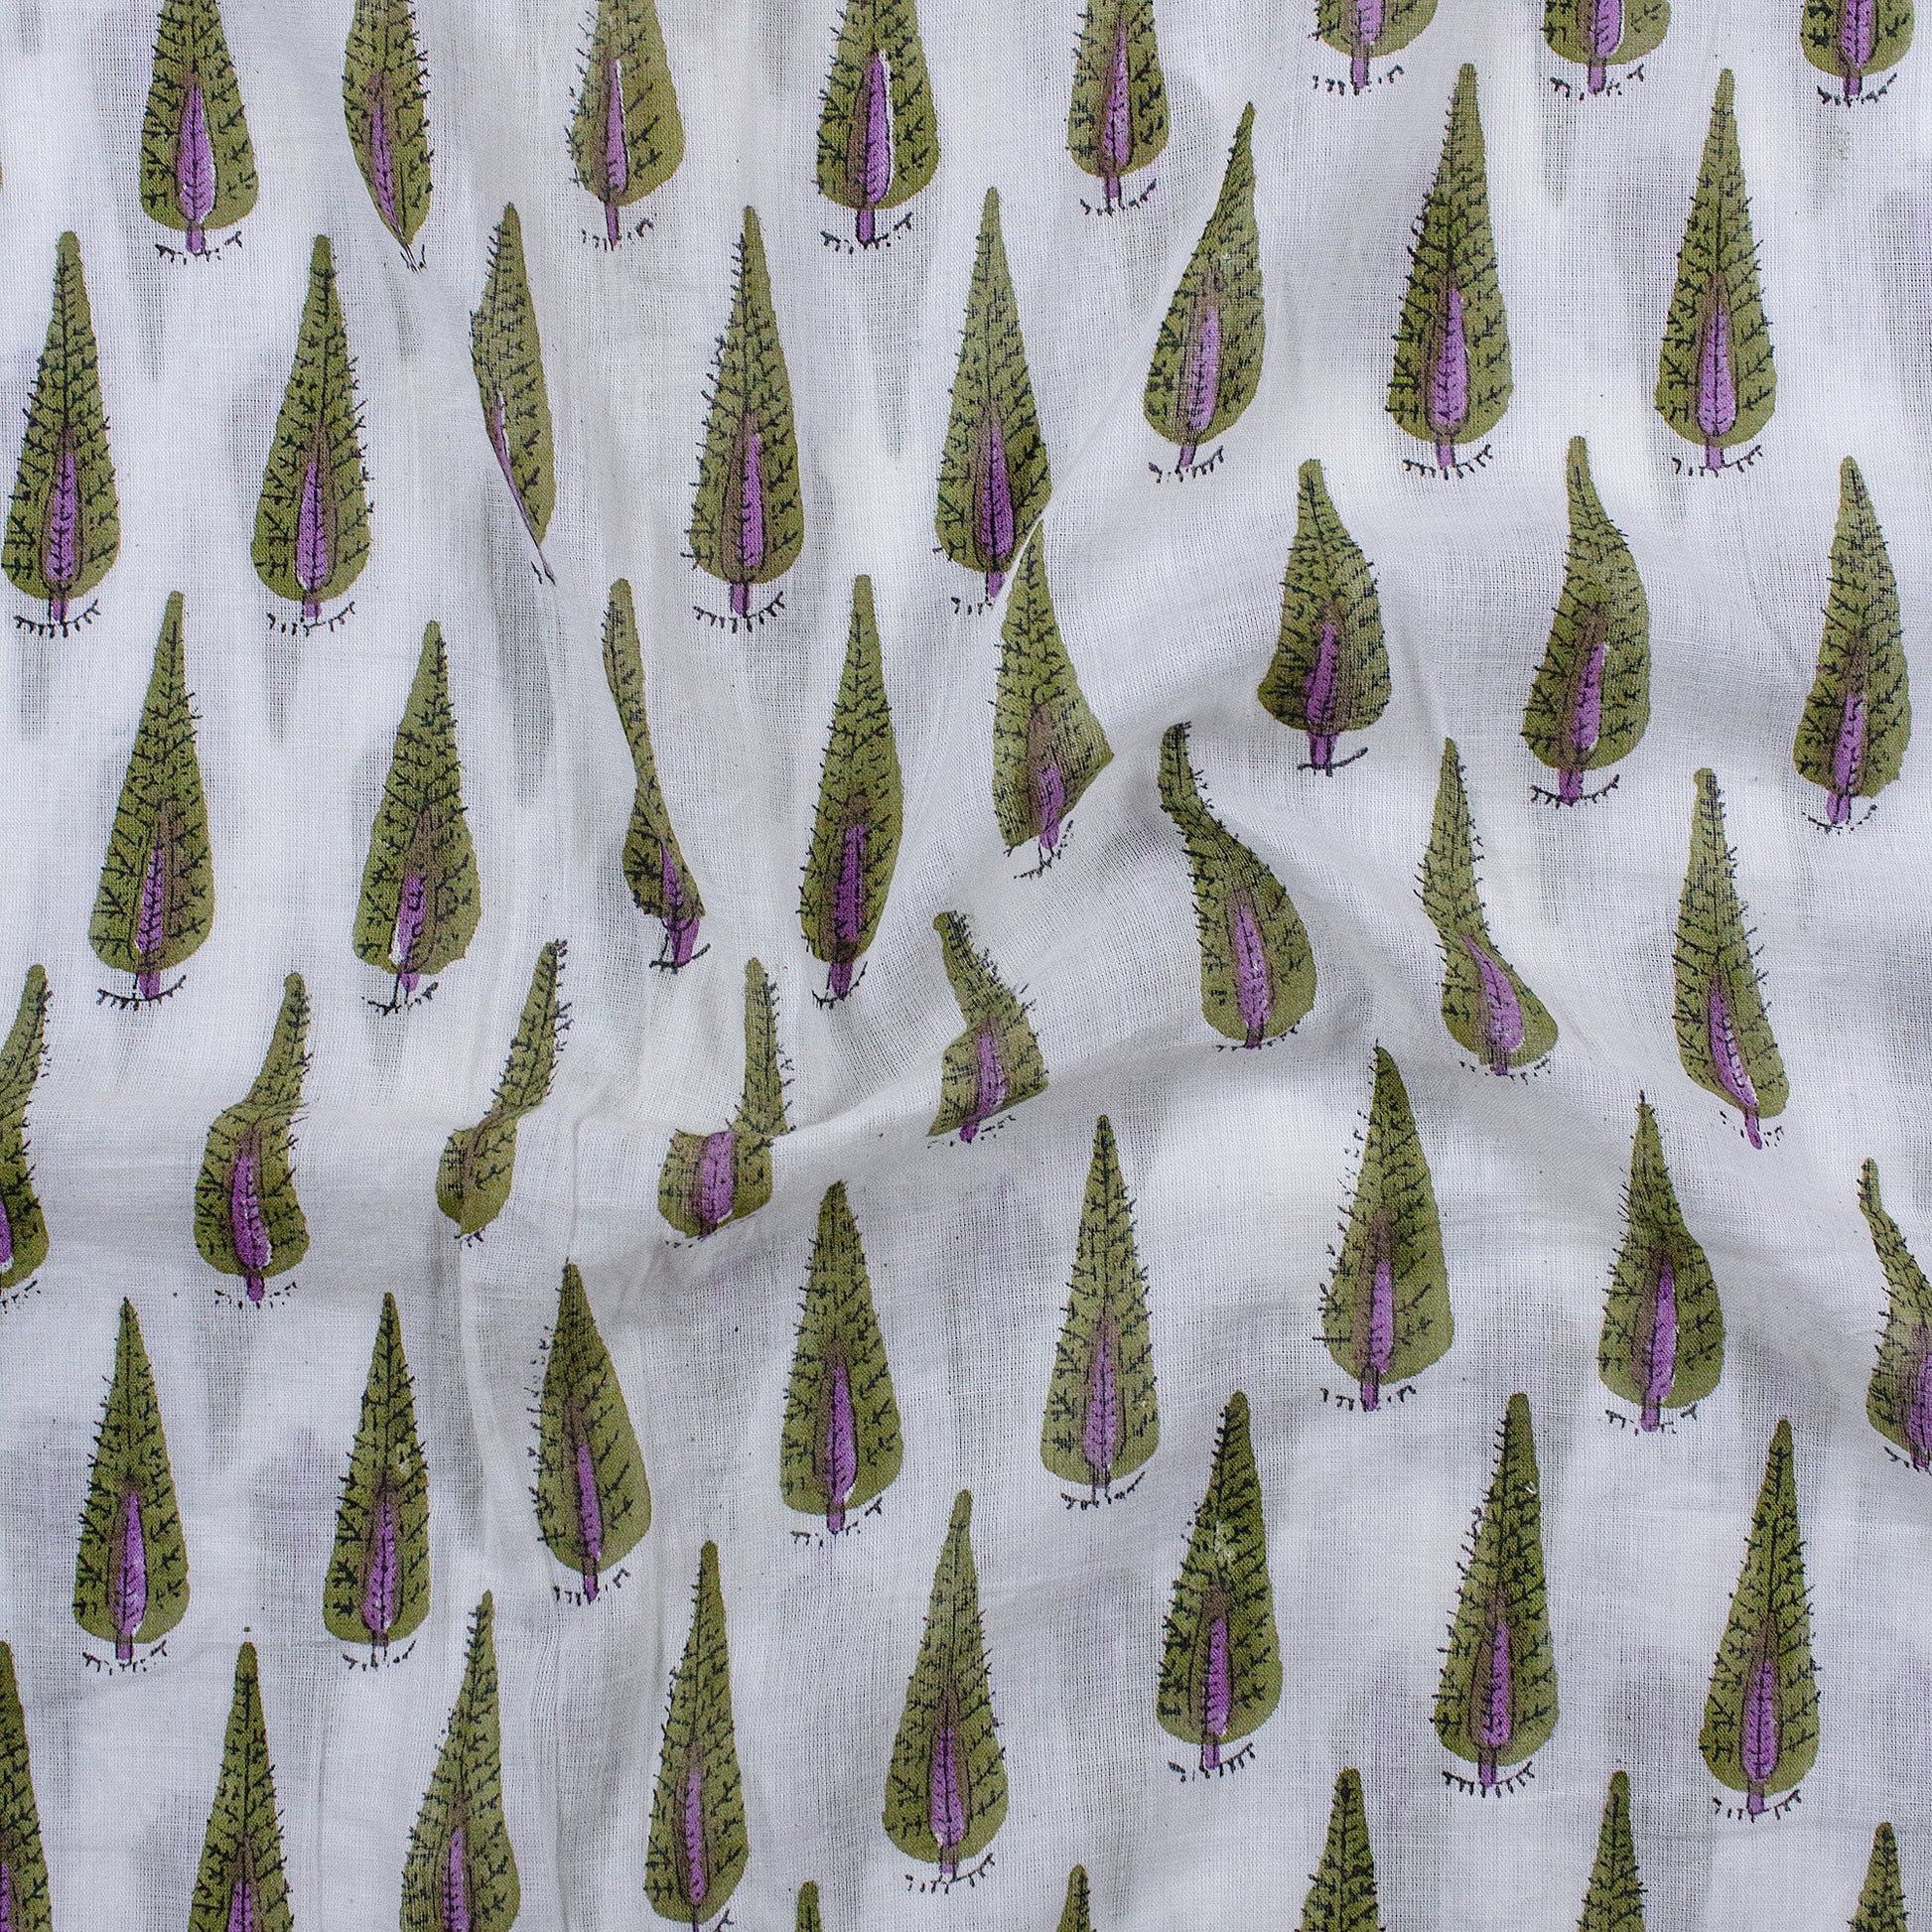 Leaf Hand Block Printed Cotton Fabric Online